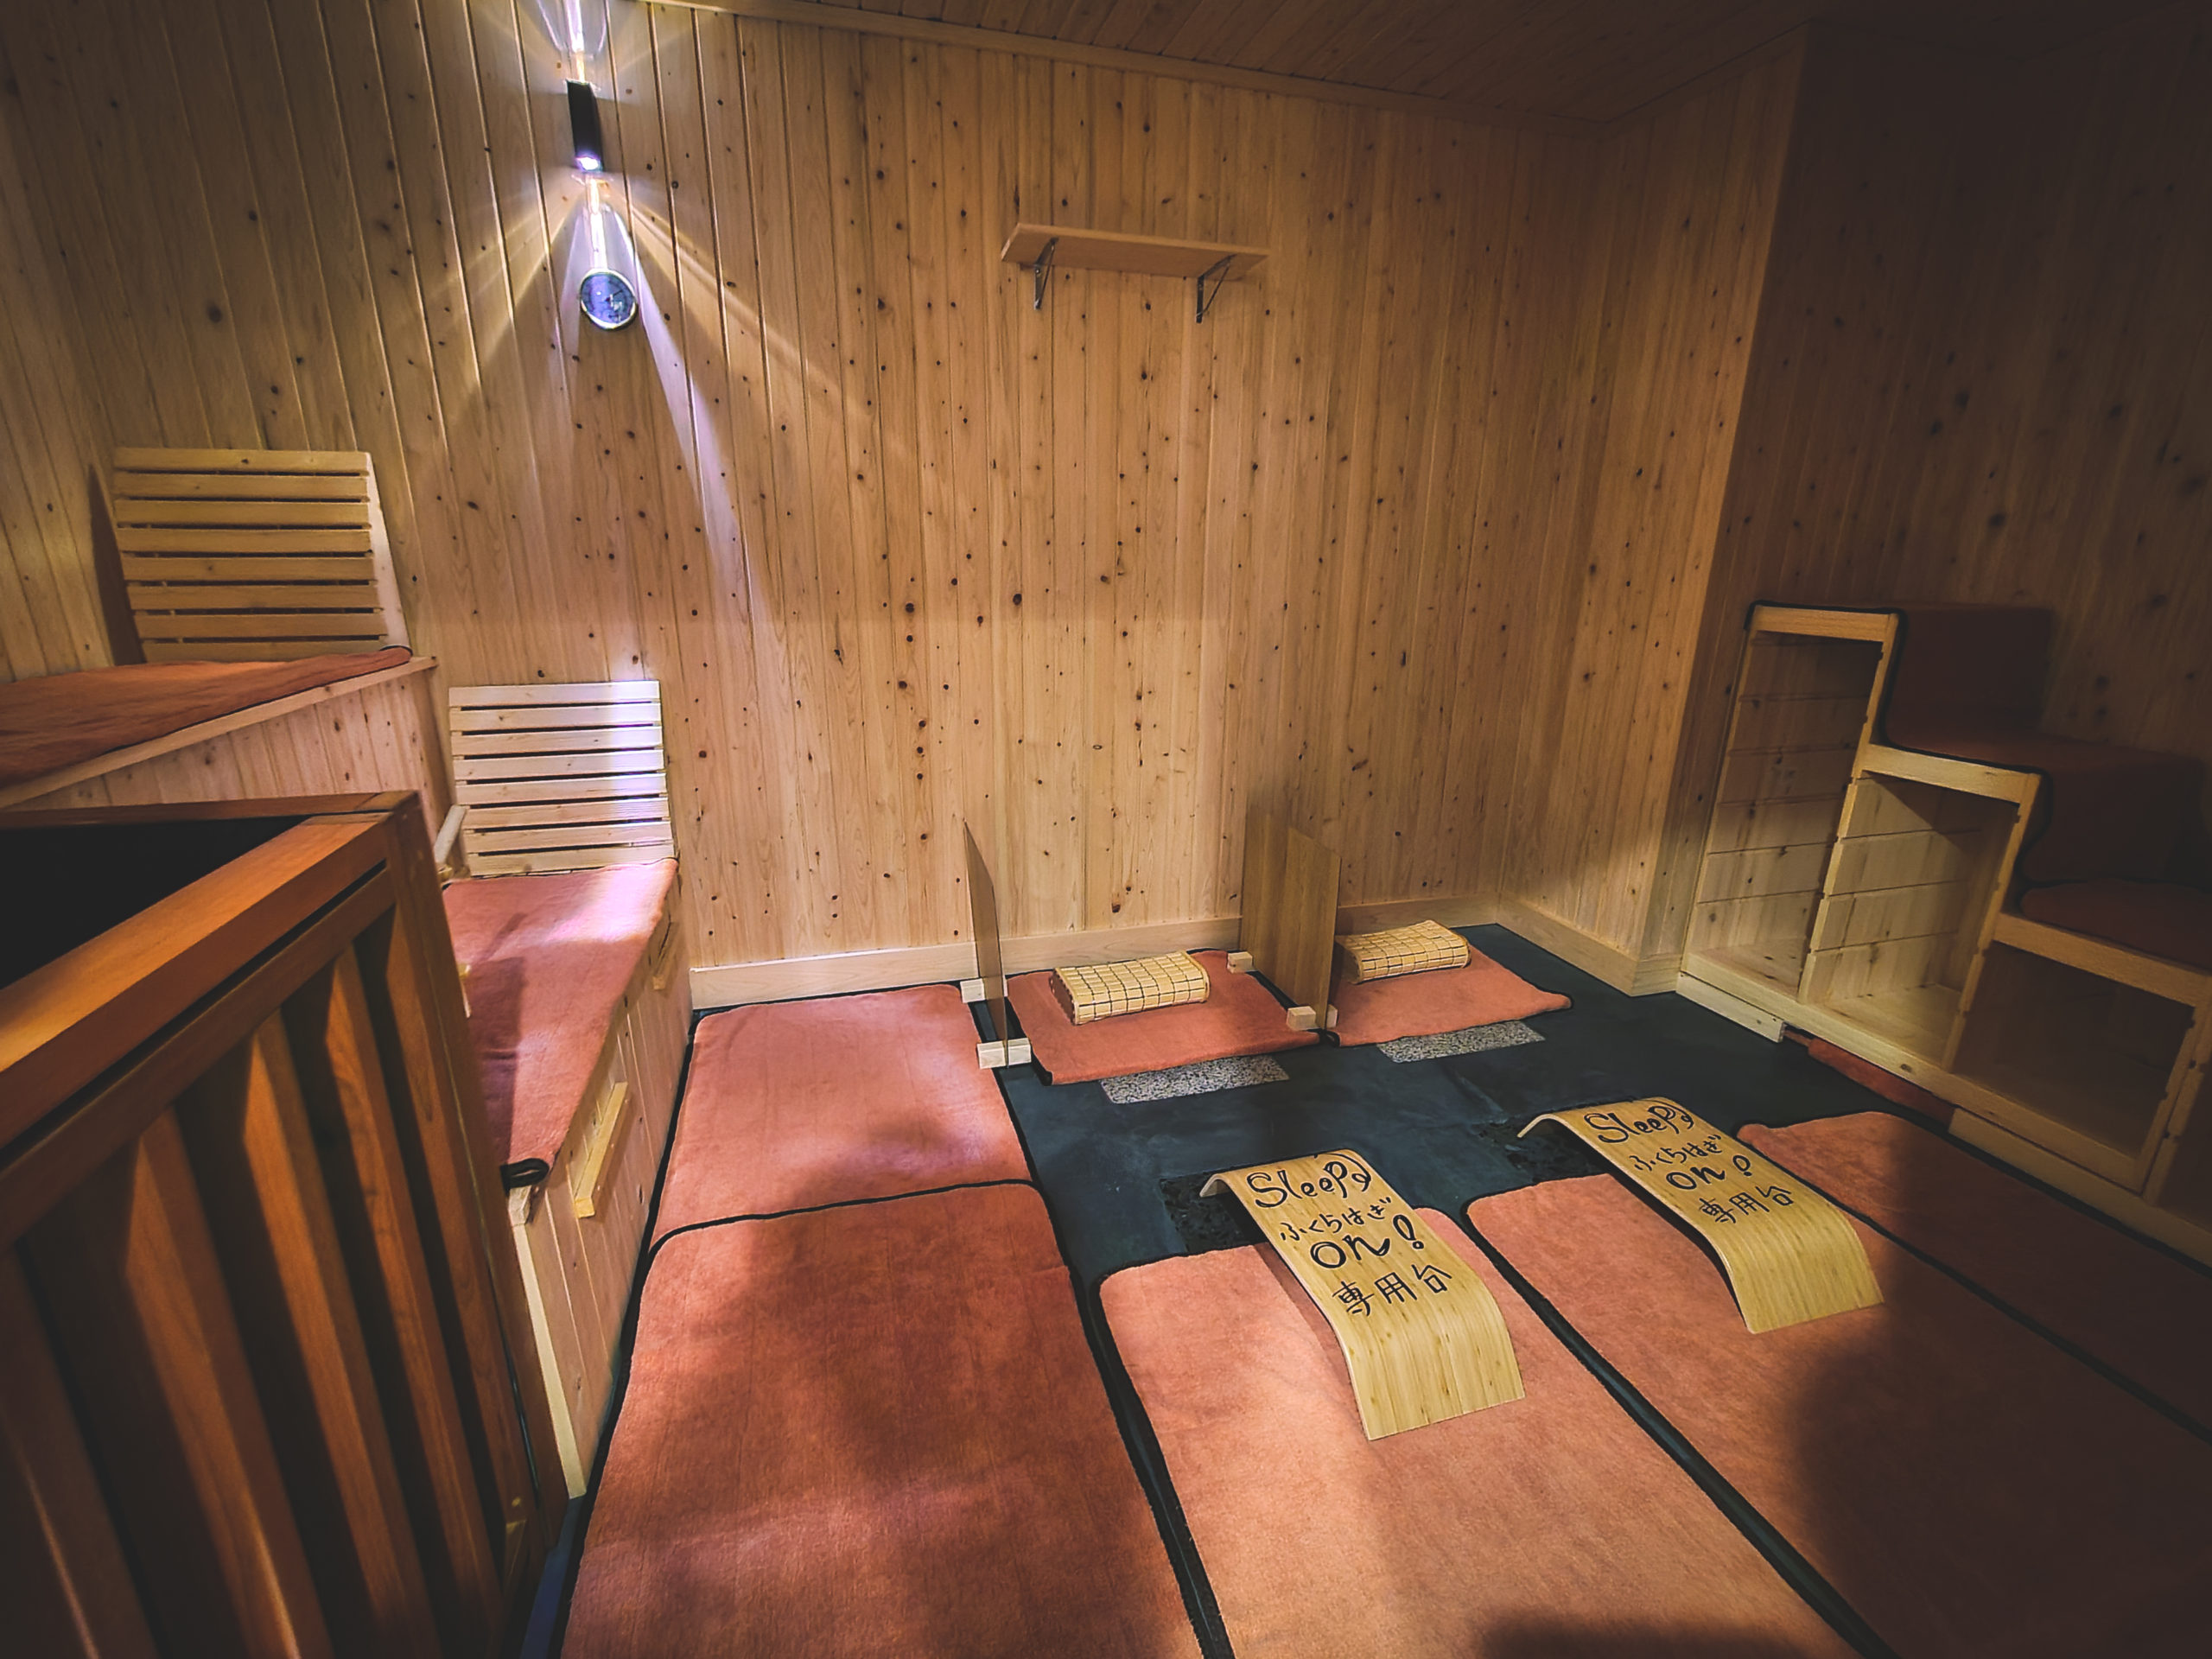 The sauna room floor features a ganbanyoku—a stone sauna using natural heated rock and has areas for sitting as well as laying down